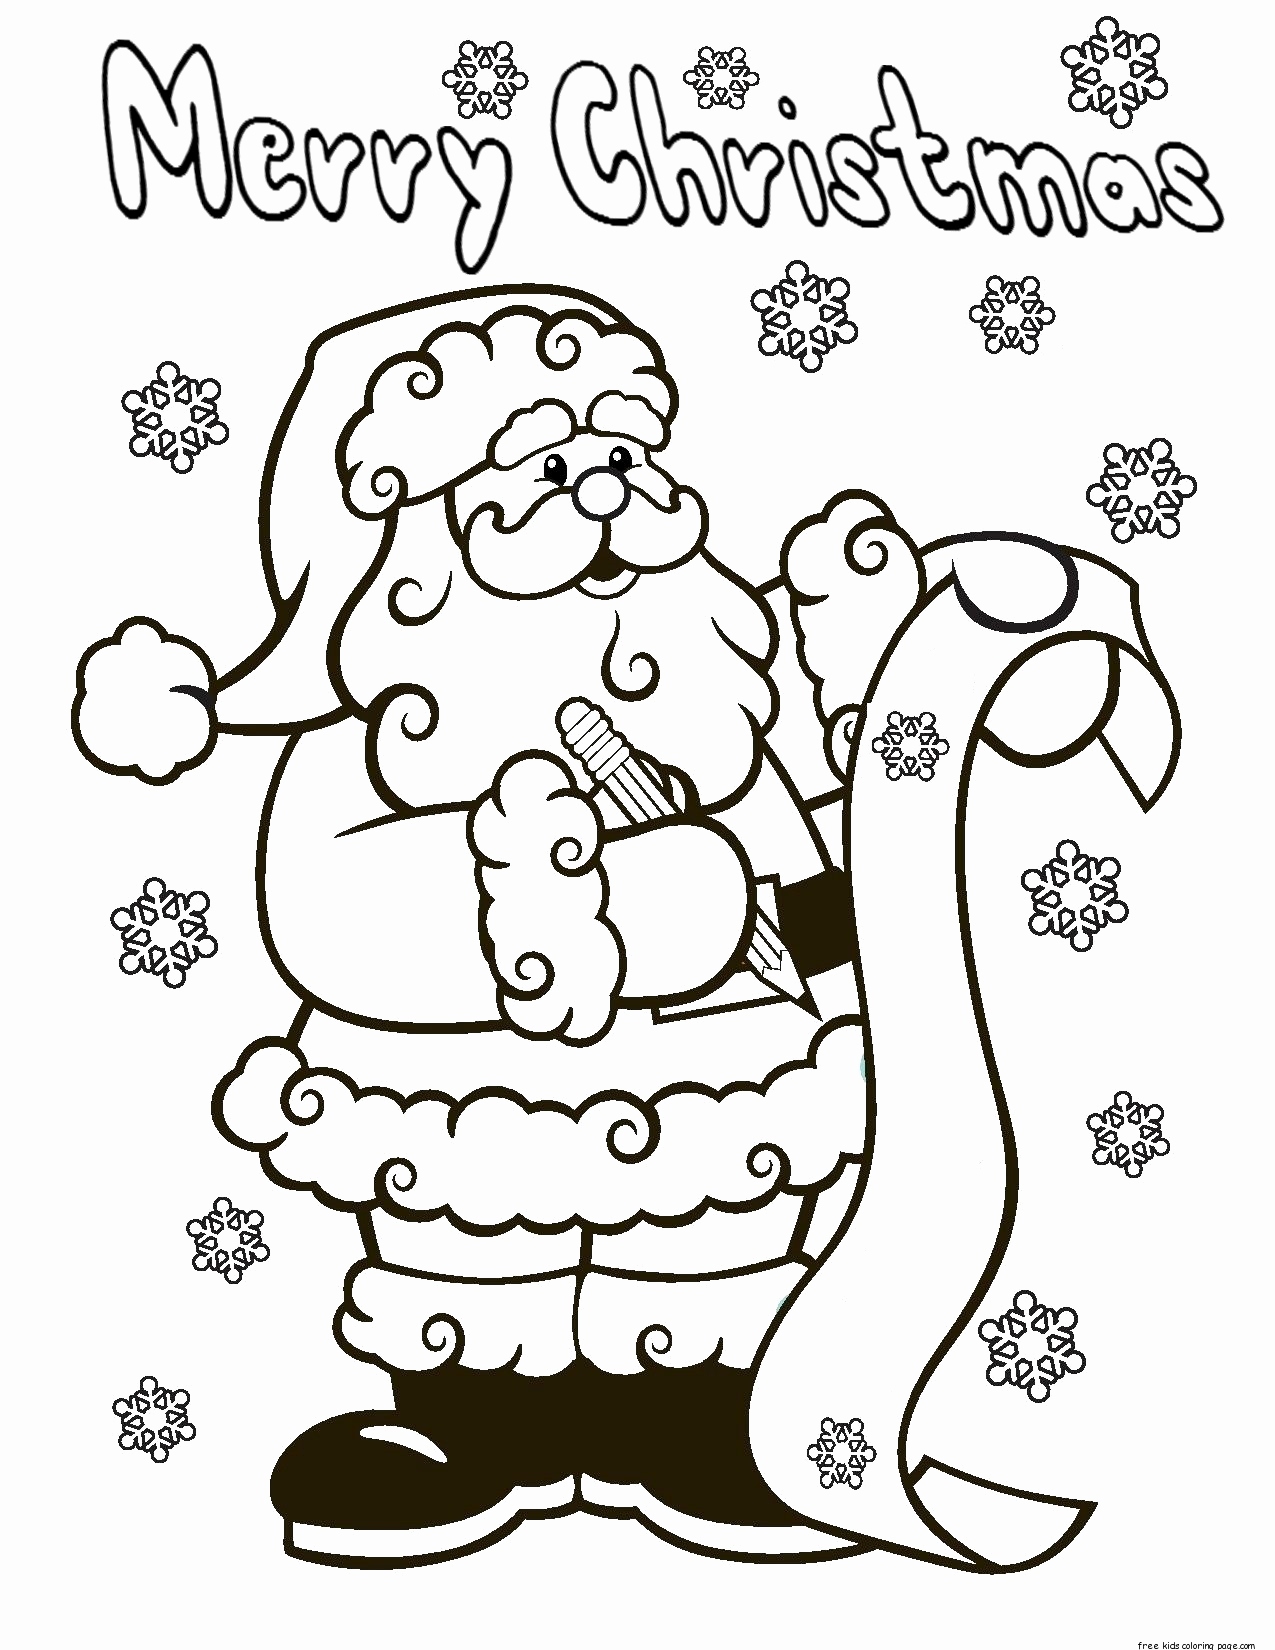 Snoopy Christmas Coloring Pages at GetDrawings Free download